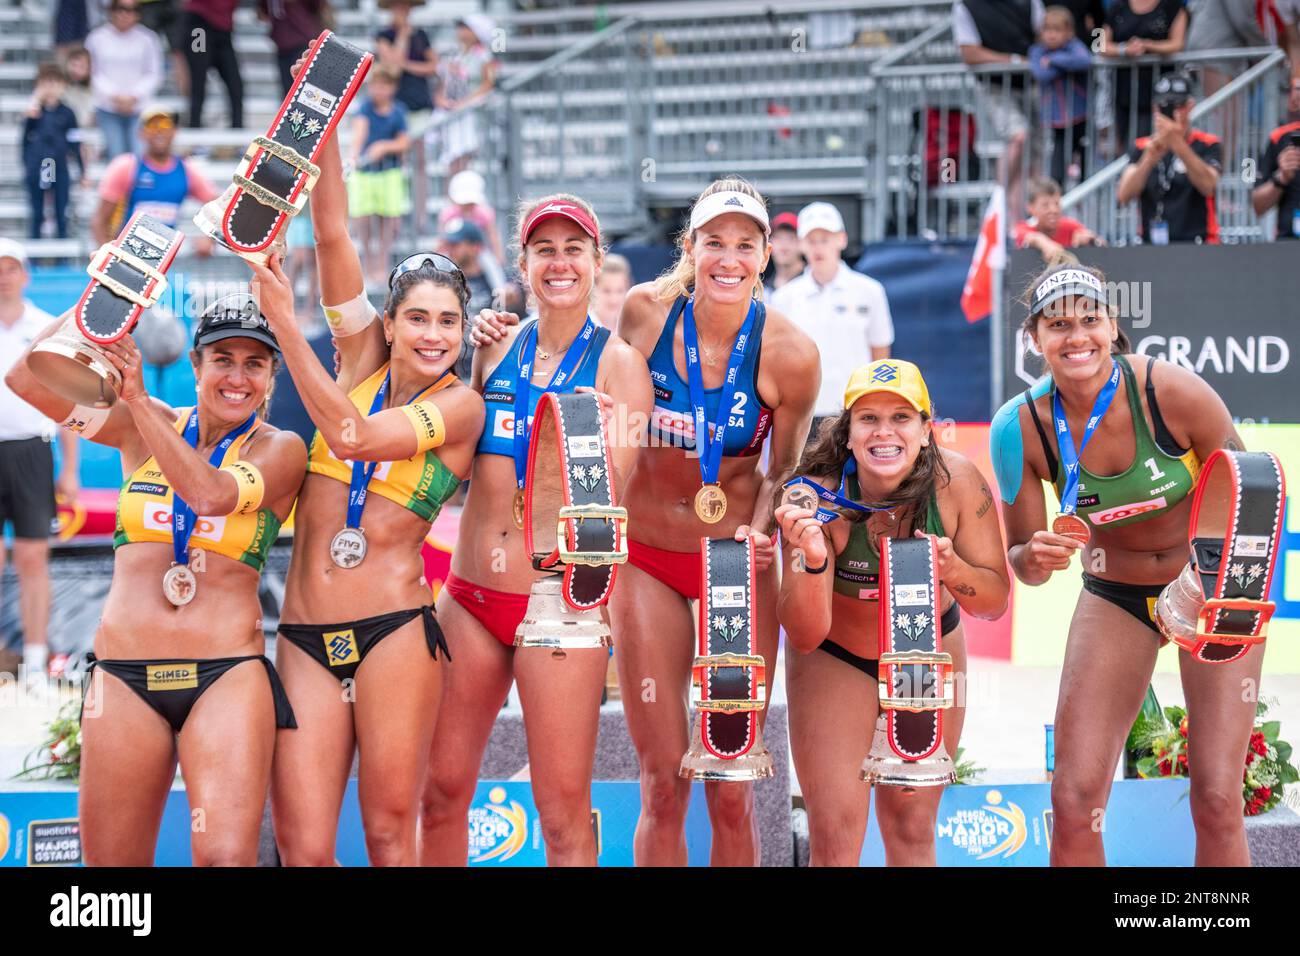 Beach volleyball players April Ross and Alix Klineman hit back brilliantly  on July 14 to secure Swatch Major Gstaad gold to add to their silver medal  won at last week's World Championships